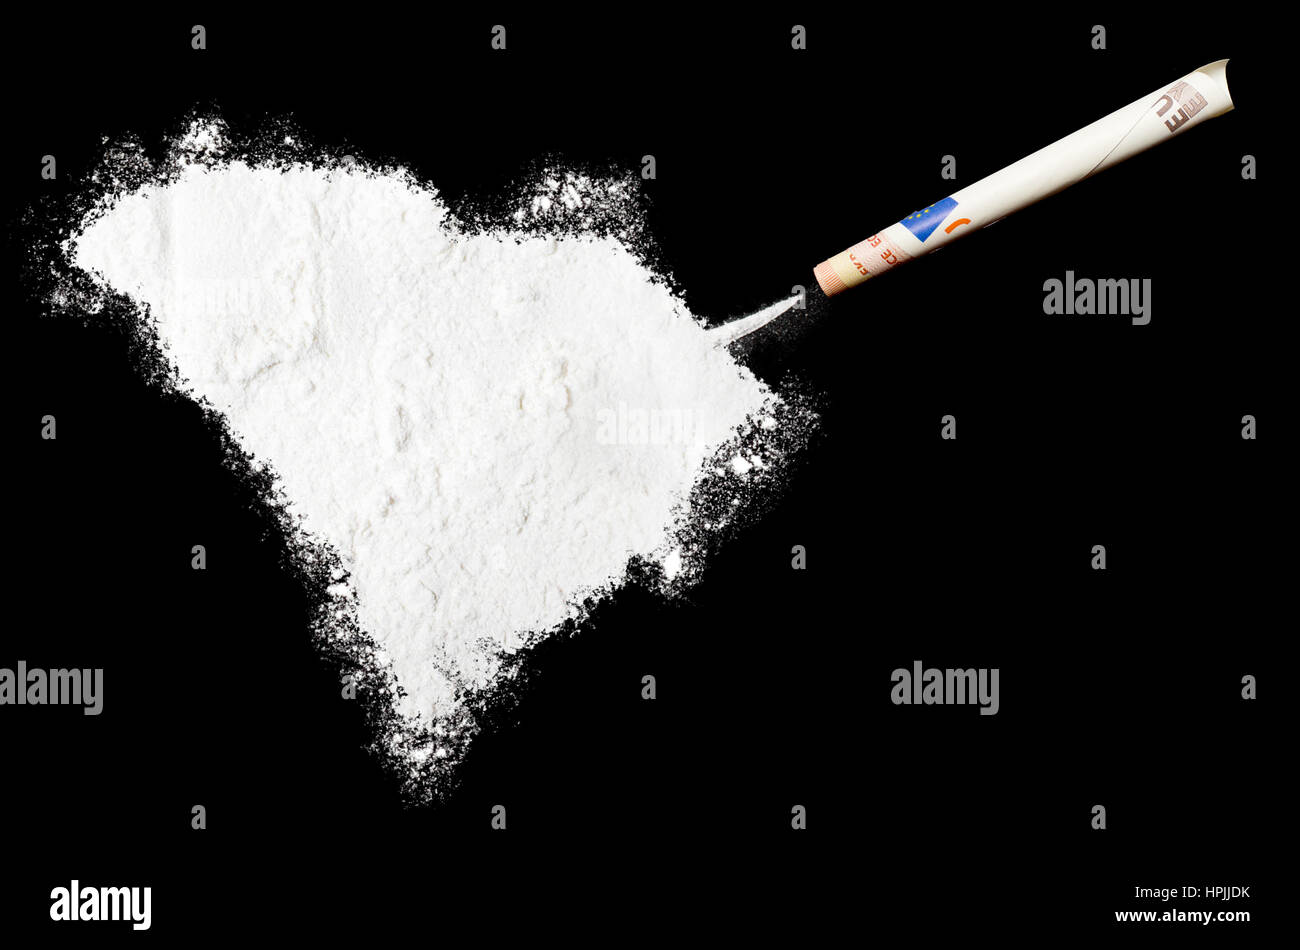 A powder drug like cocaine in the shape of South Carolina with a rolled money bill.(series) Stock Photo